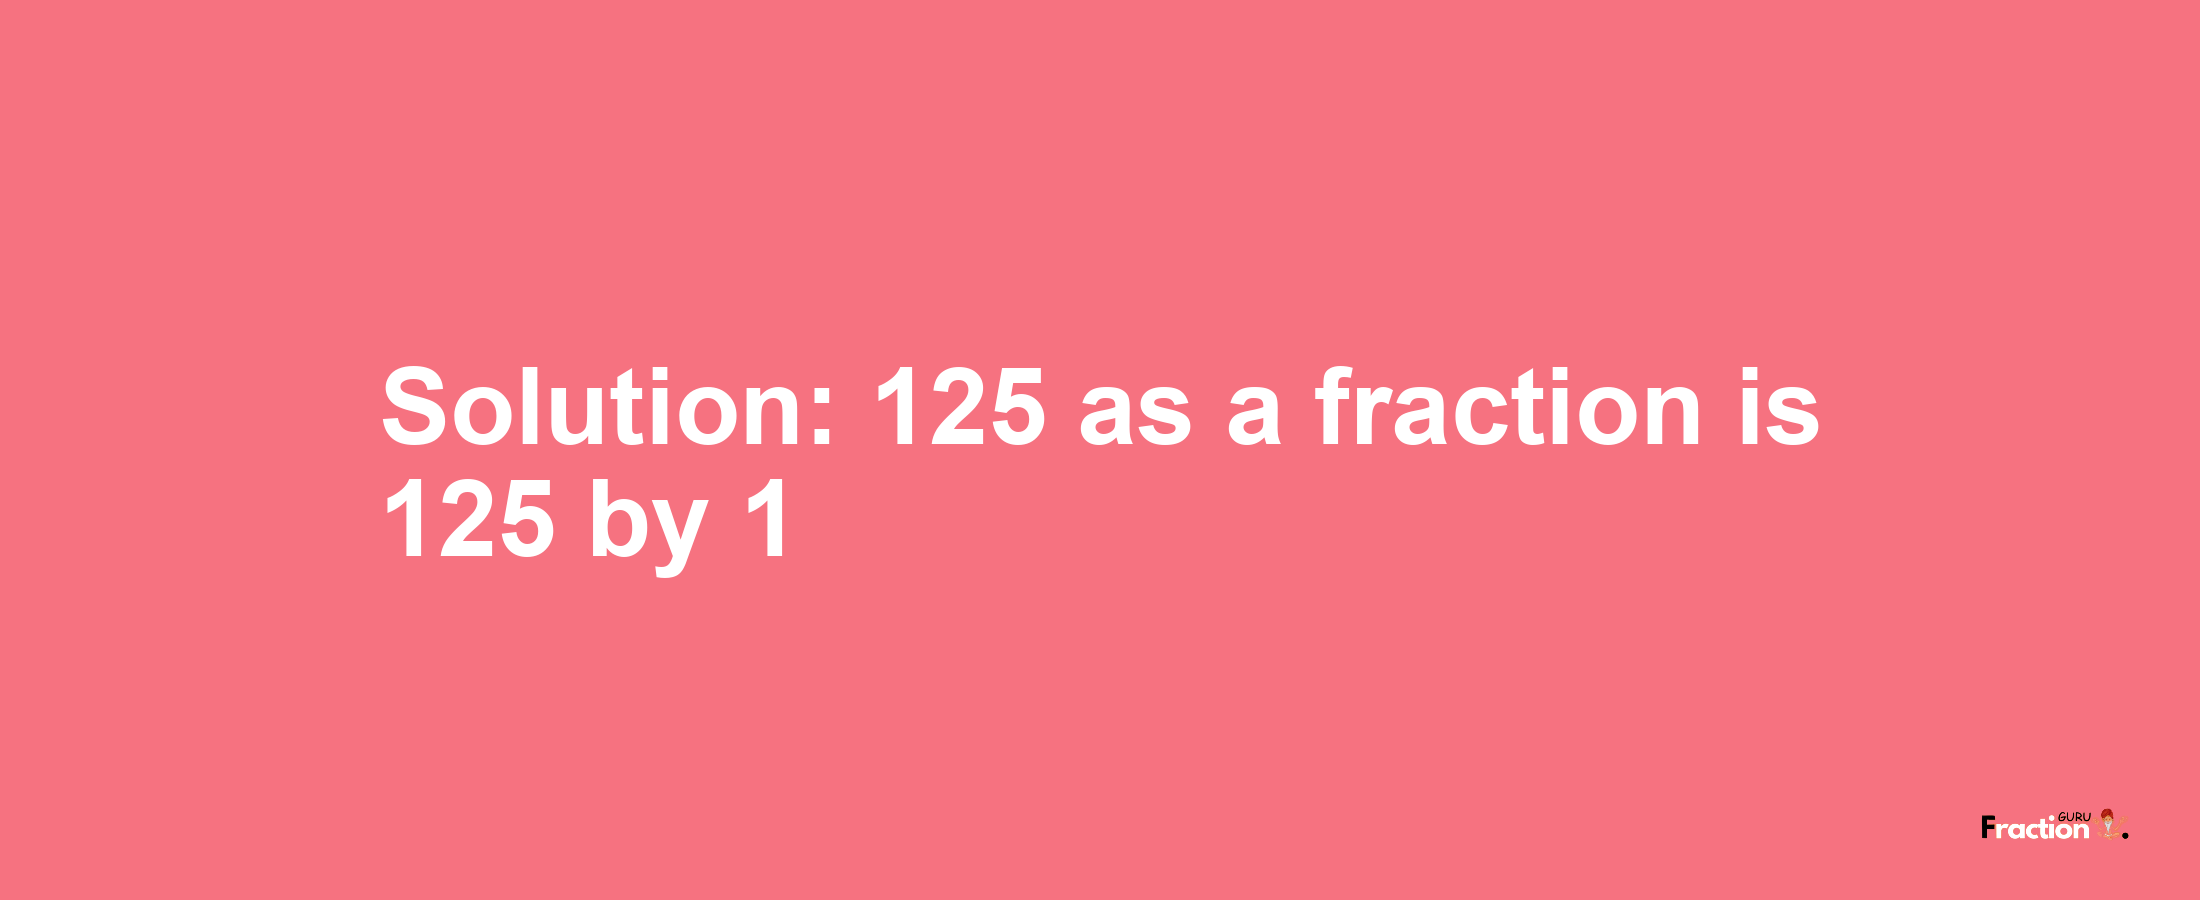 Solution:125 as a fraction is 125/1